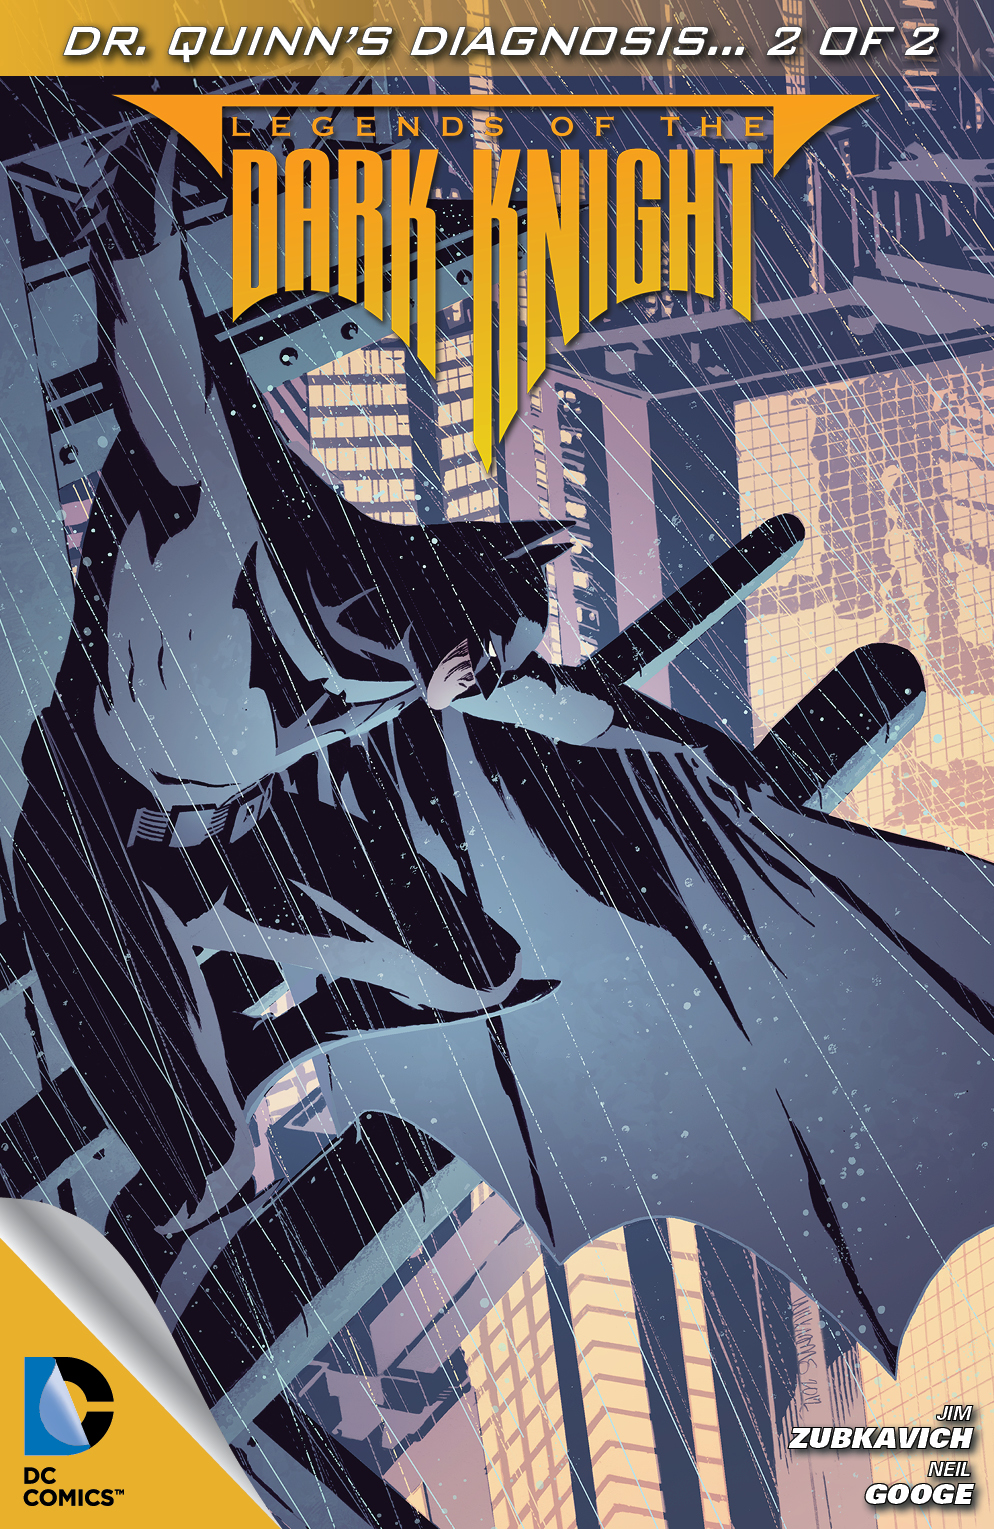 Legends of the Dark Knight #50 preview images